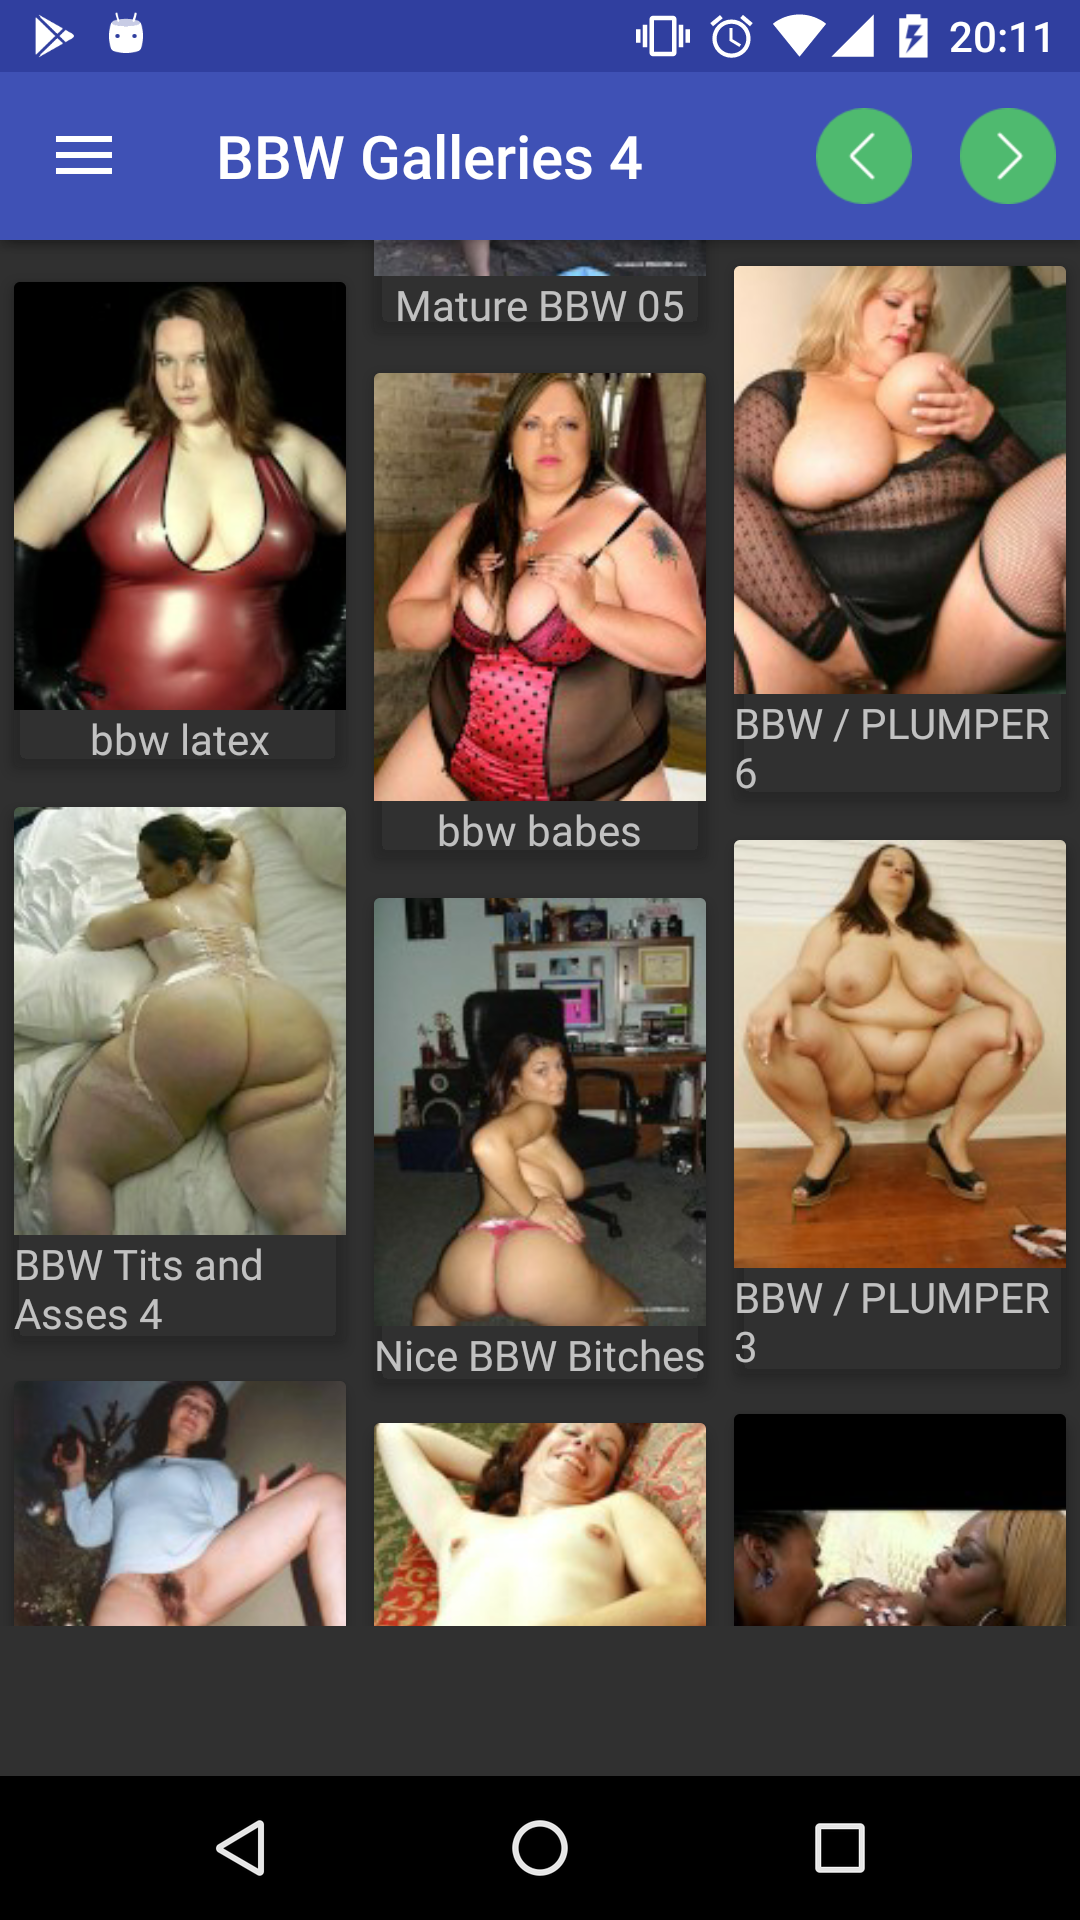 BBW Girls girls,pic,photo,for,hentai,pics,apk,apps,black,android,editor,porn,gallery,free,chubby,sexyteengalleries,app,amateurs,bbw,pornstars,saxy,pictires,fatty,galleries